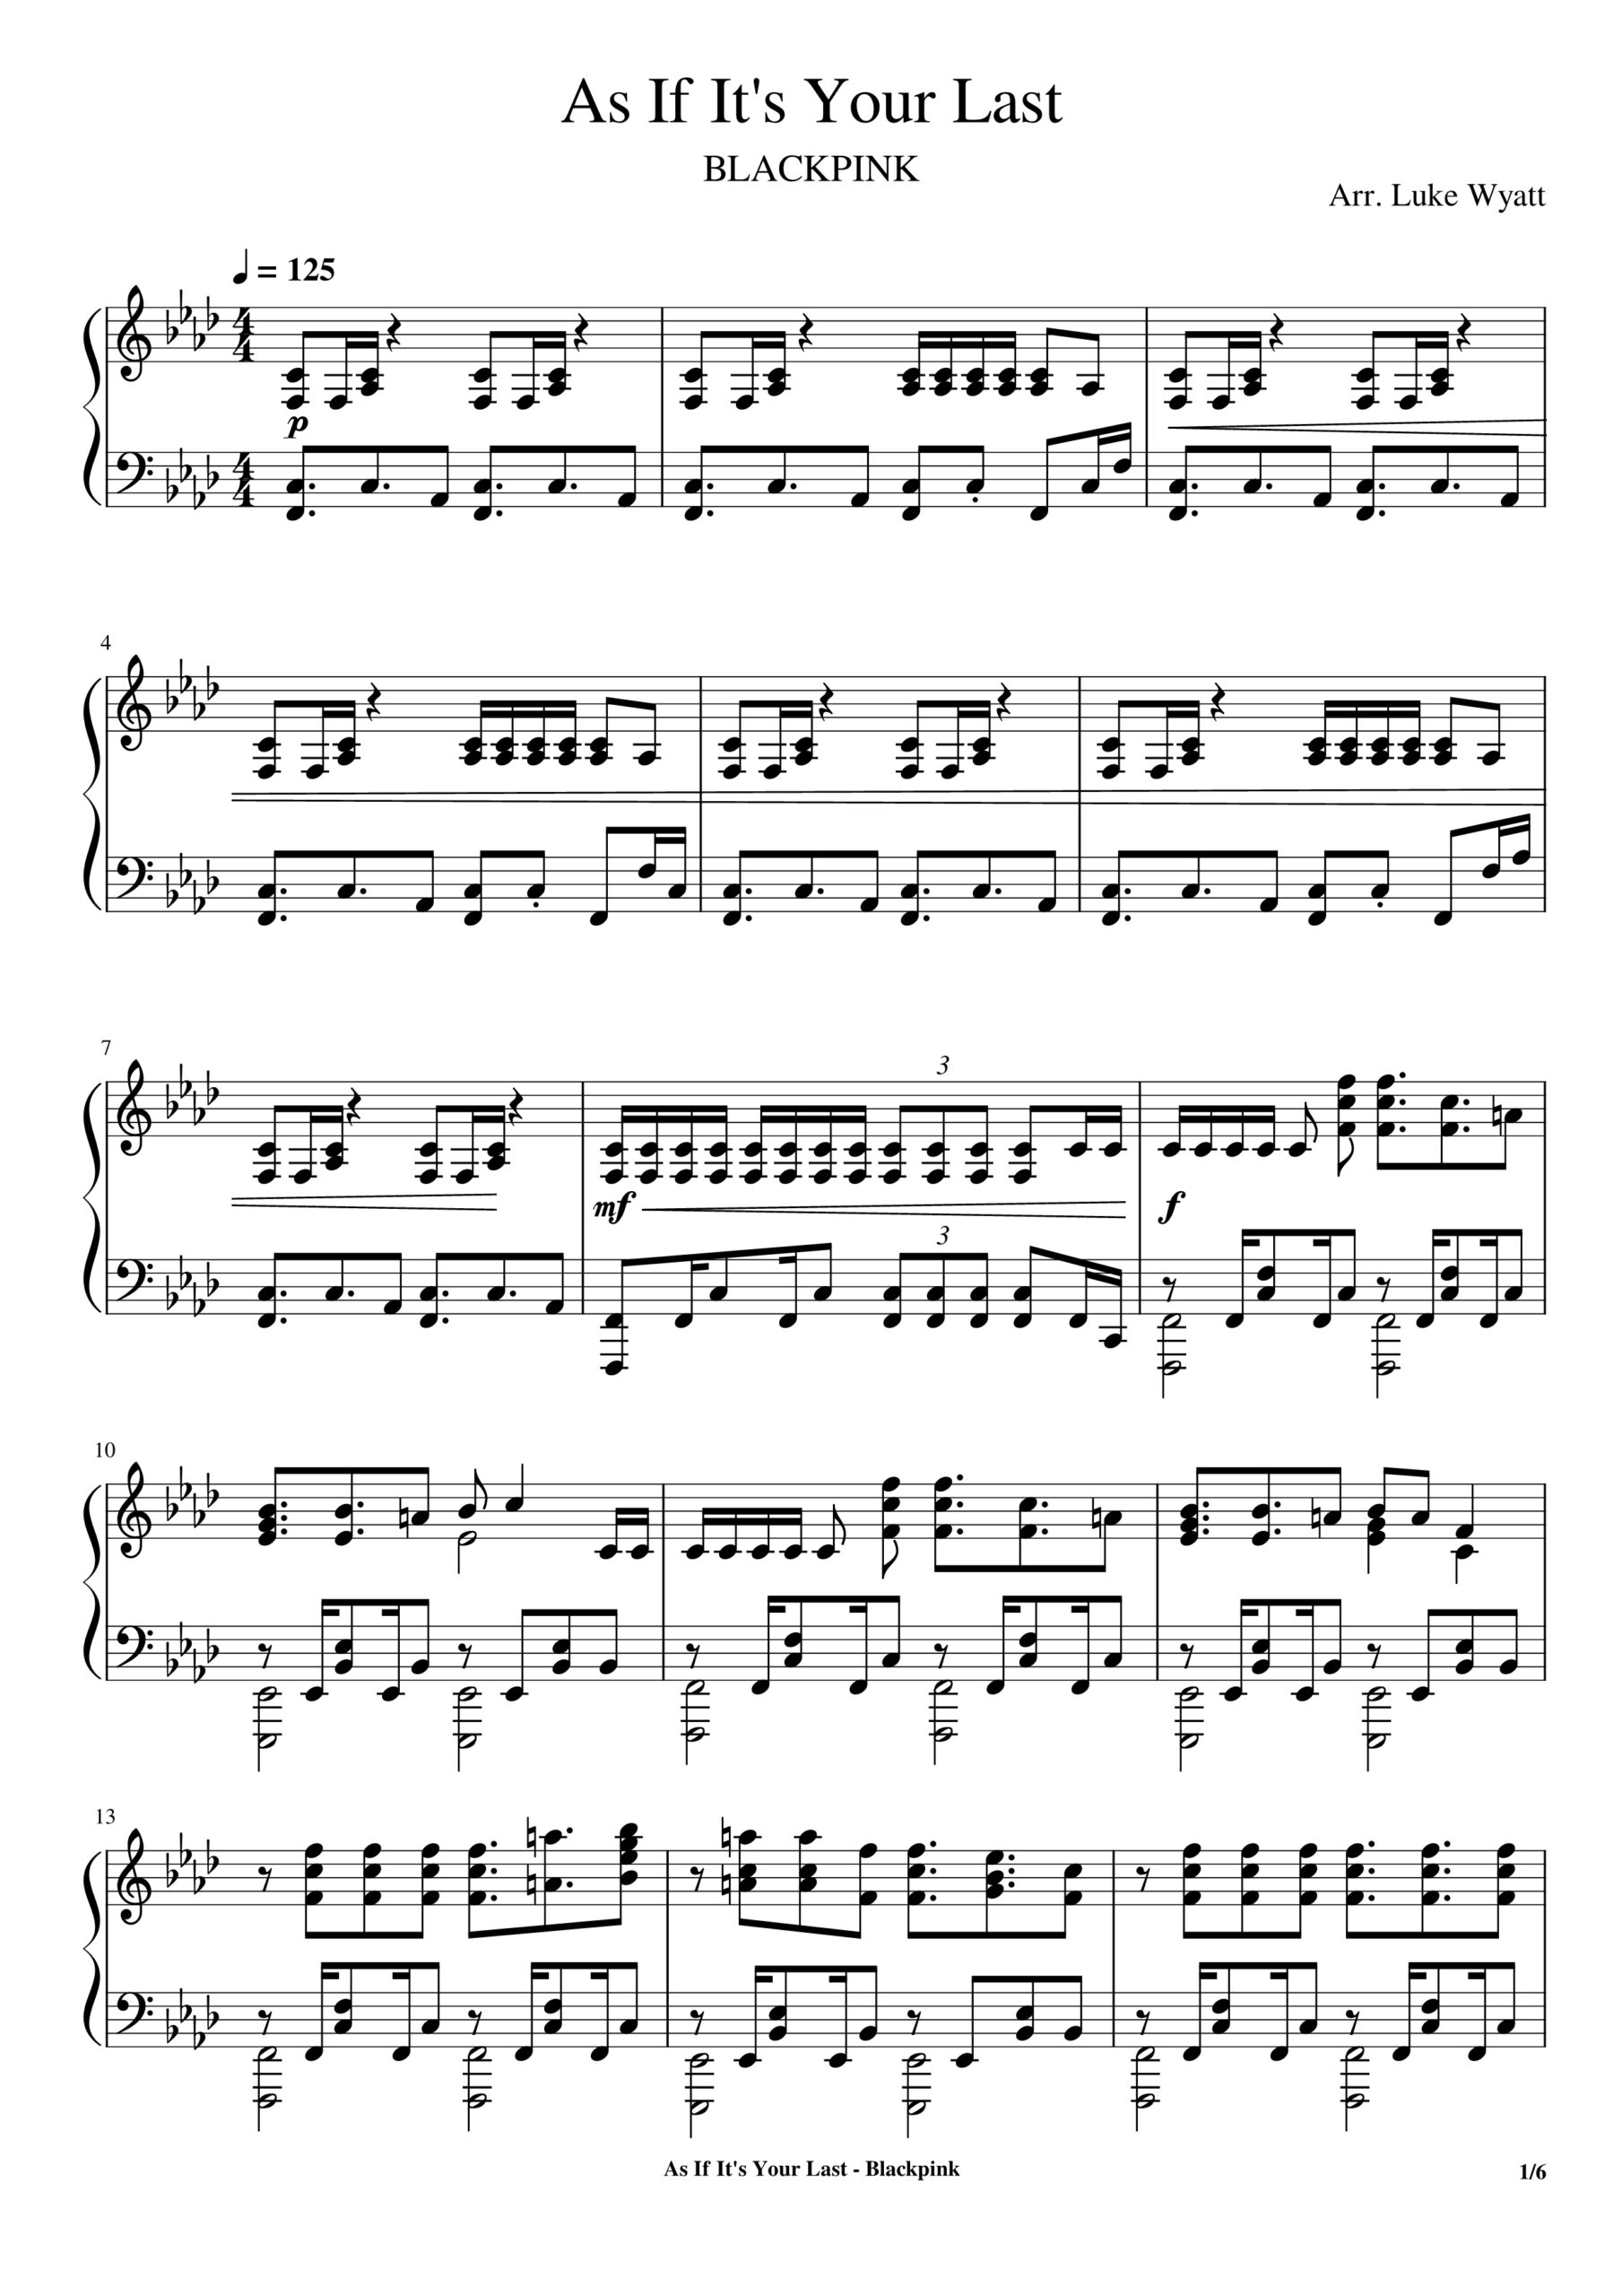 Blackpink, As If It's Your Last Piano Sheet Music Page 1